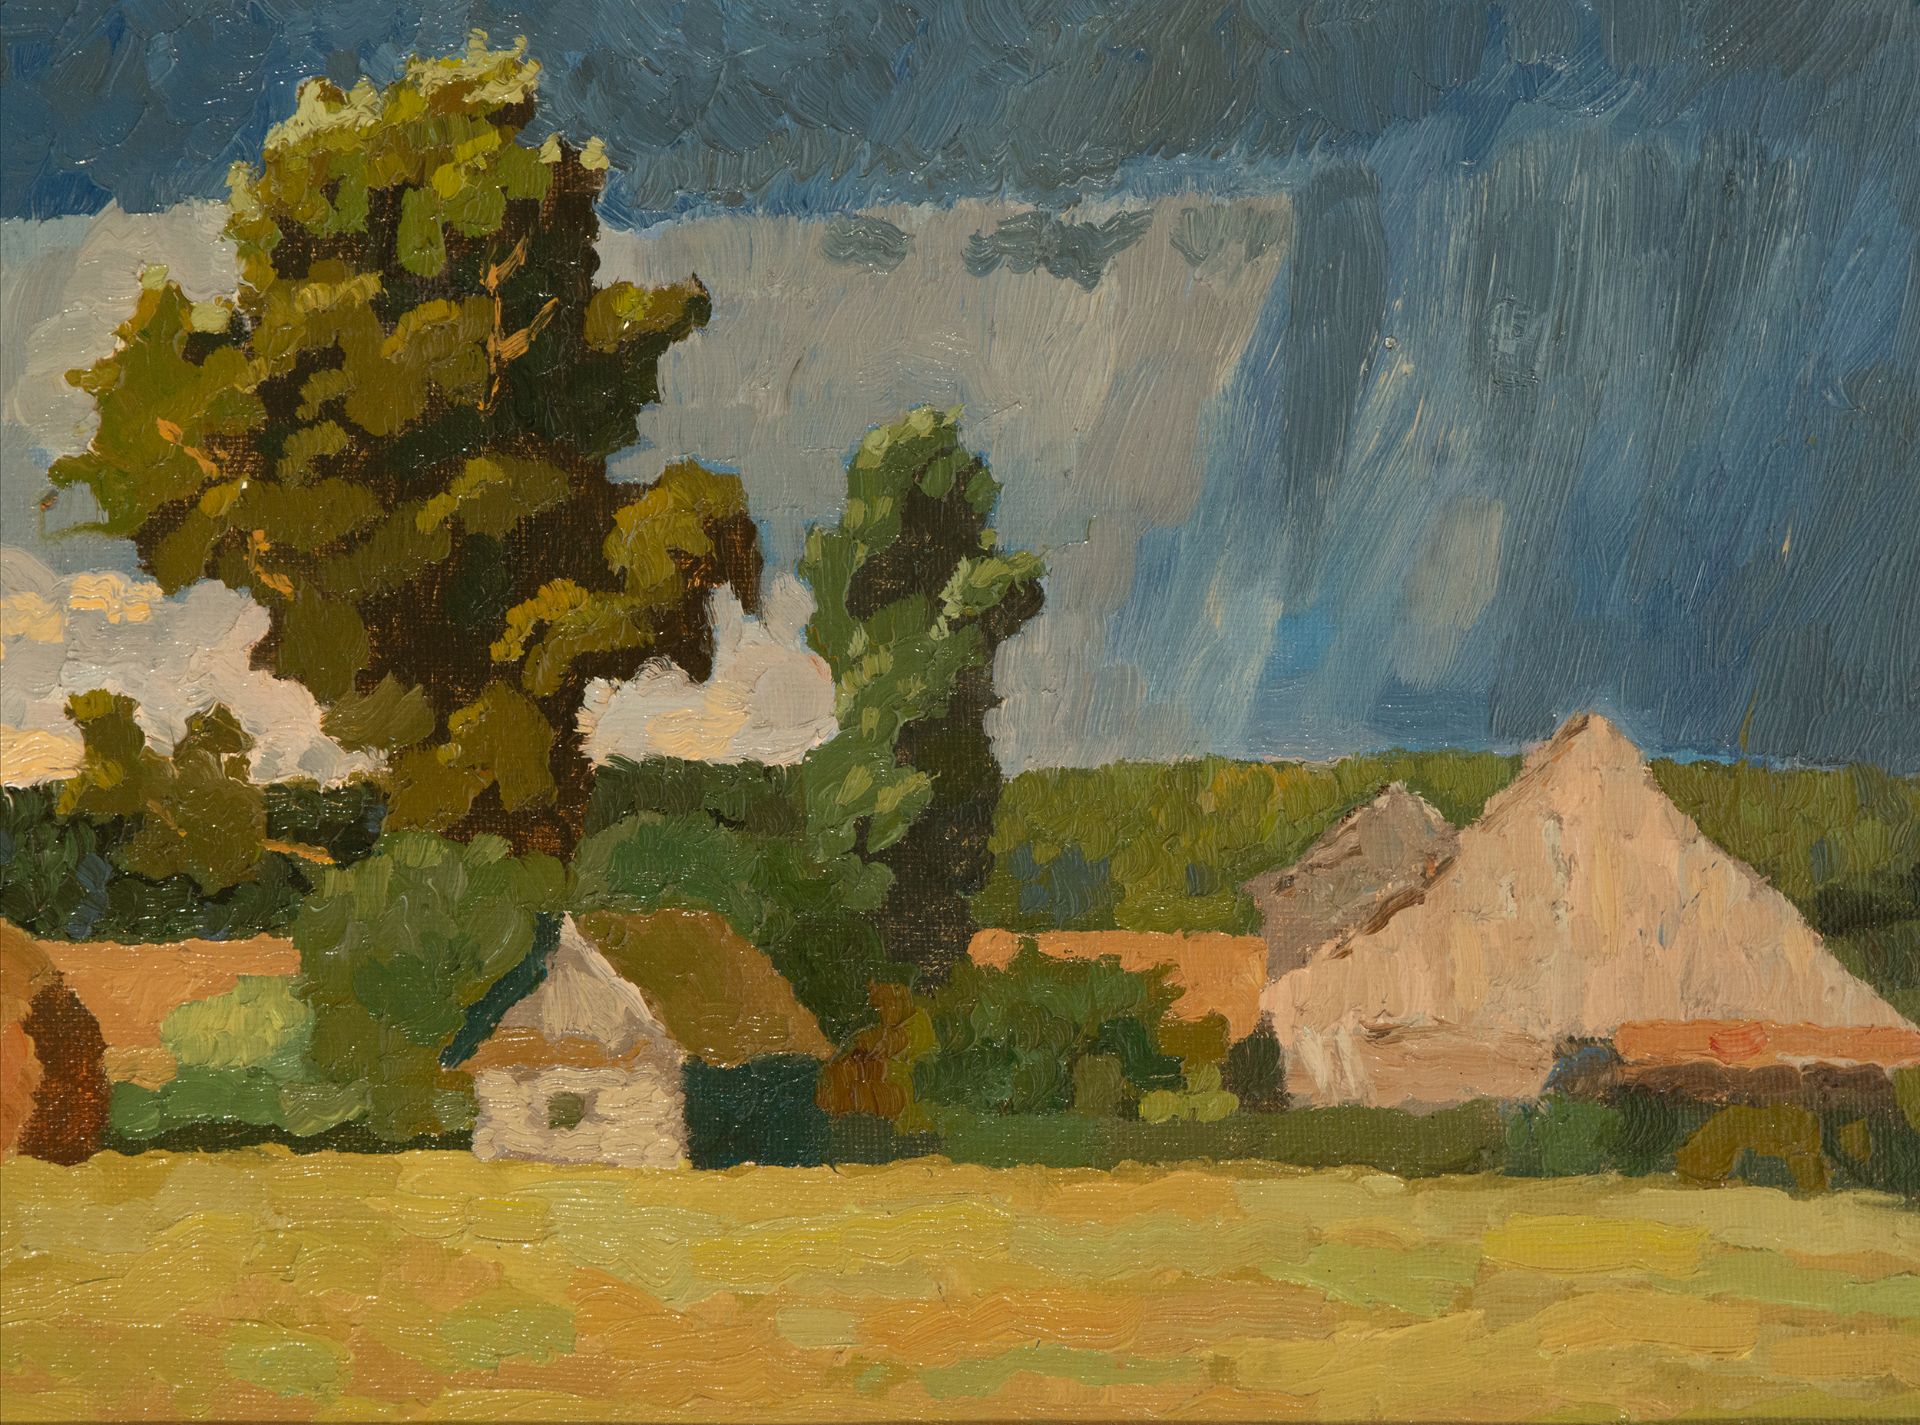 Country Landscape, 20th century Russian school, with label on the back - Image 2 of 6